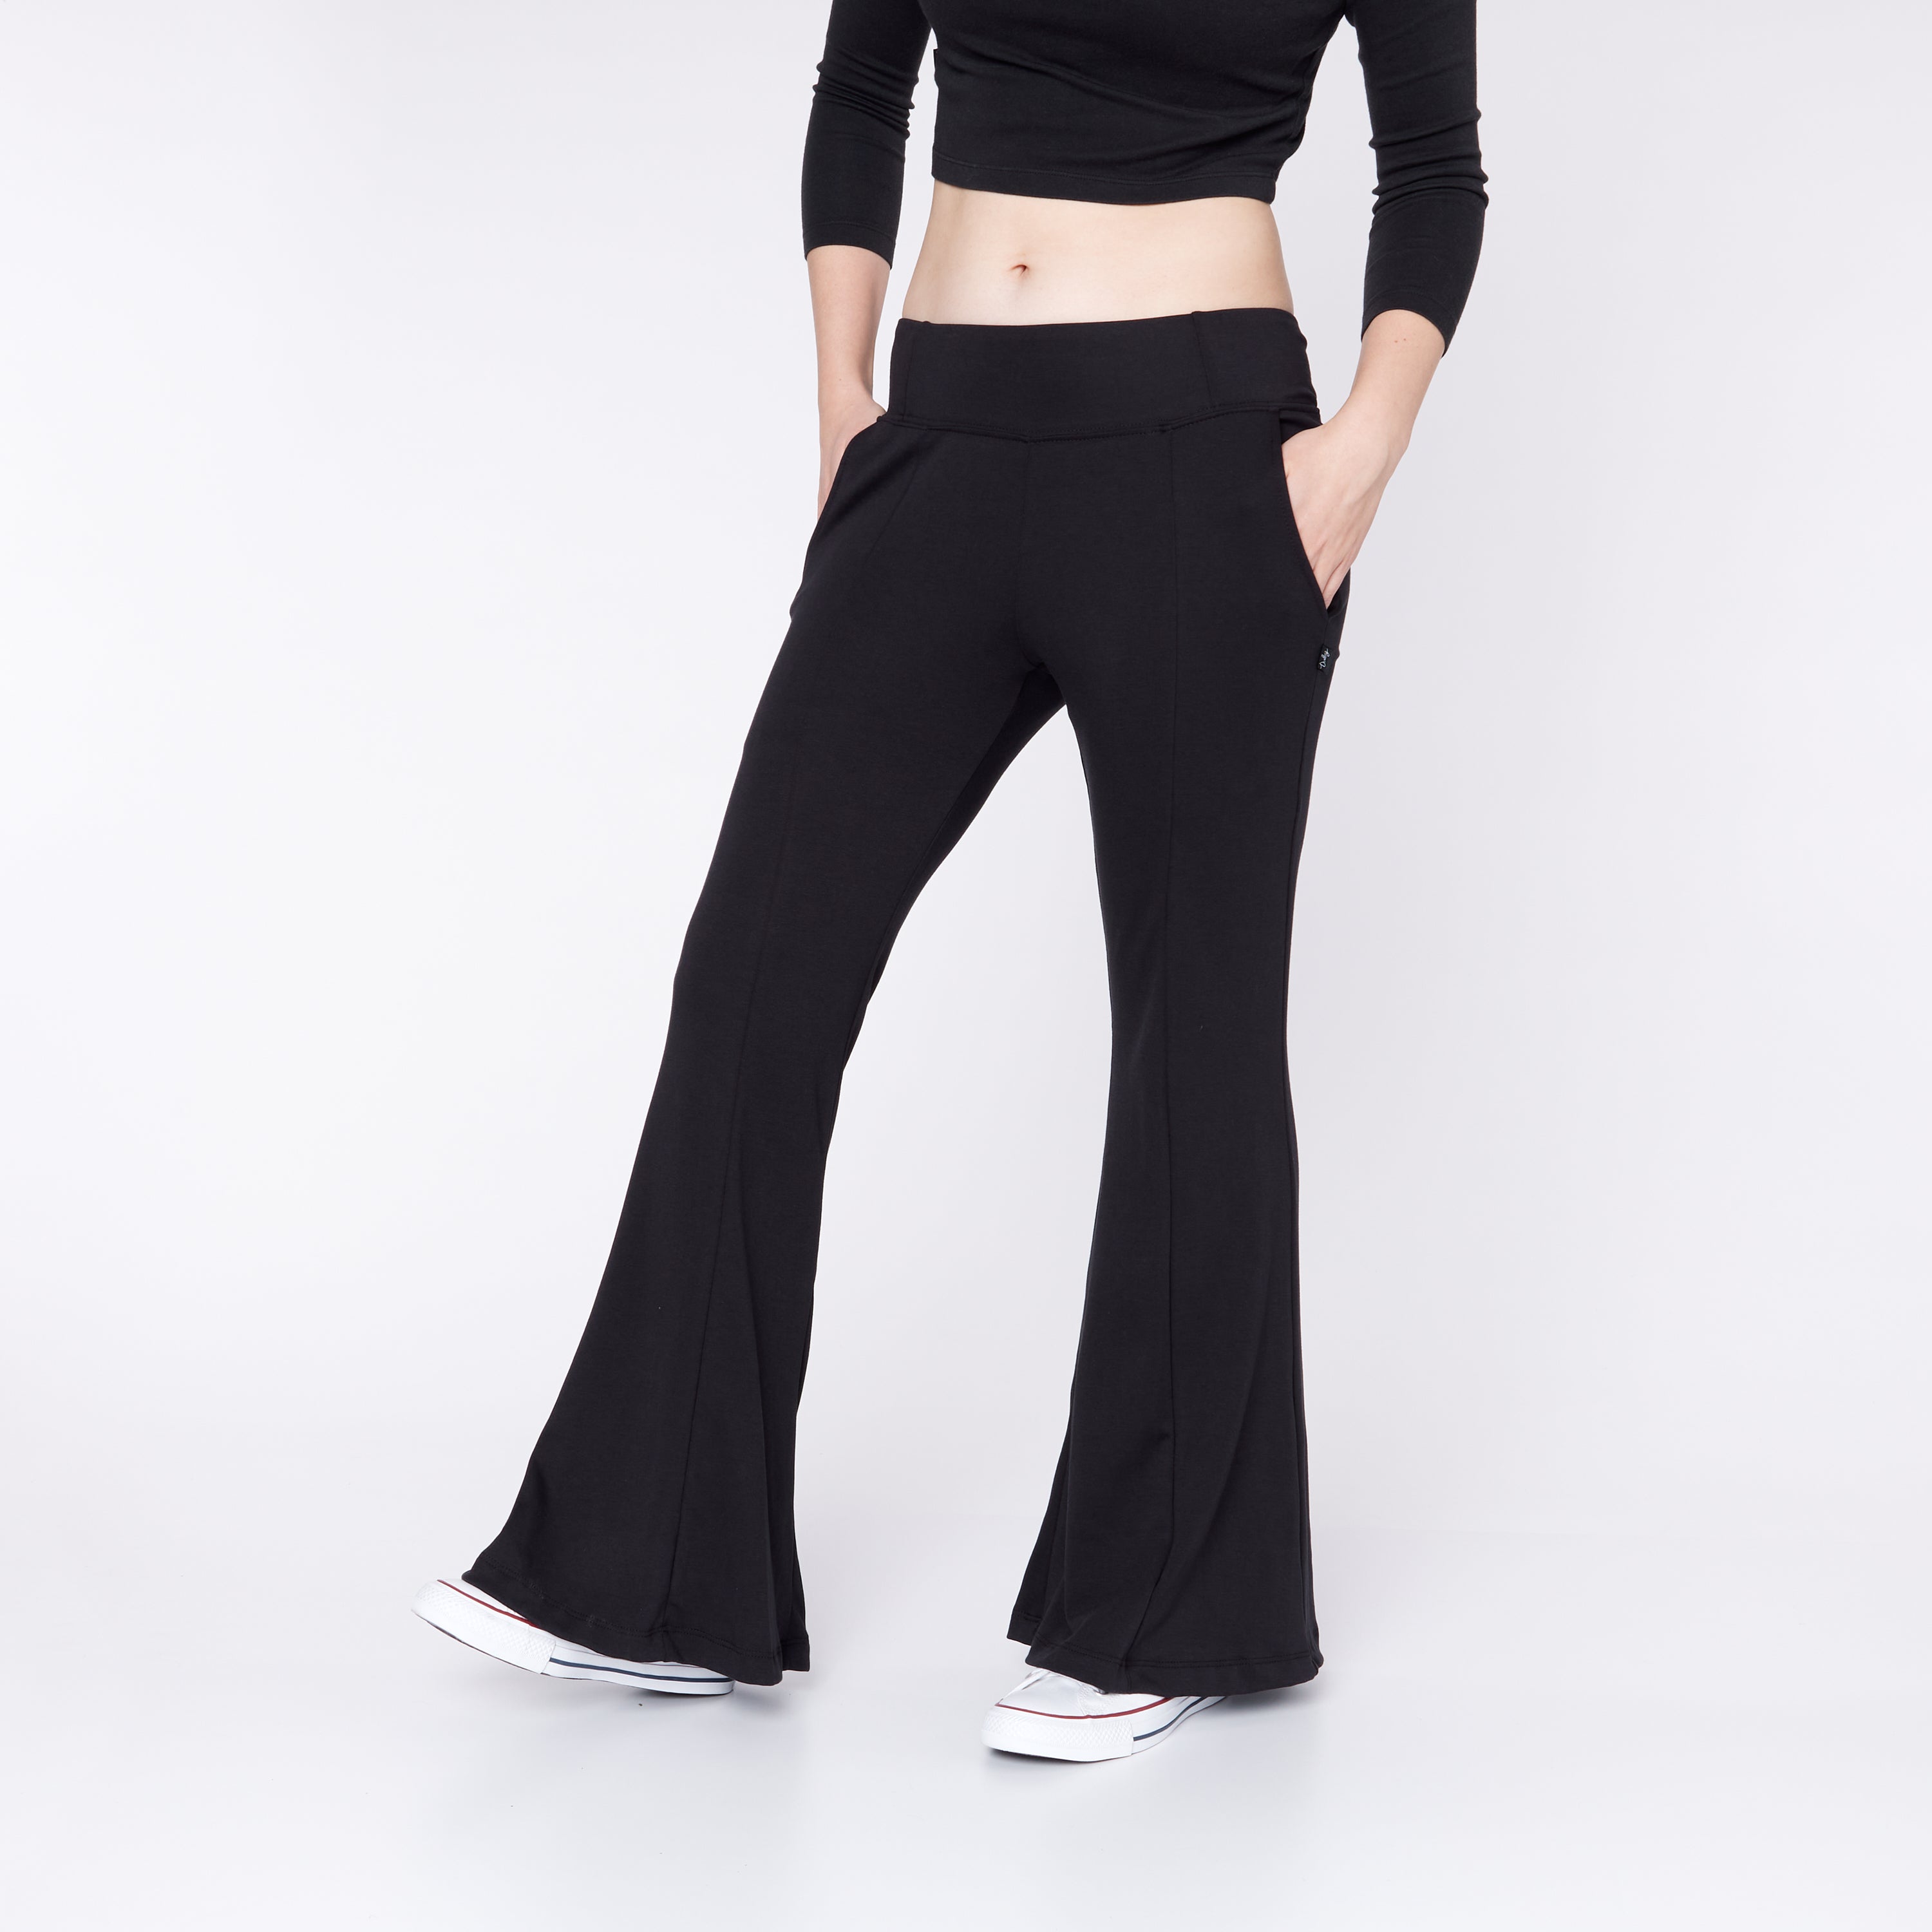 low waist flares  Outfits with leggings, Black flare pants, Black pants  outfit